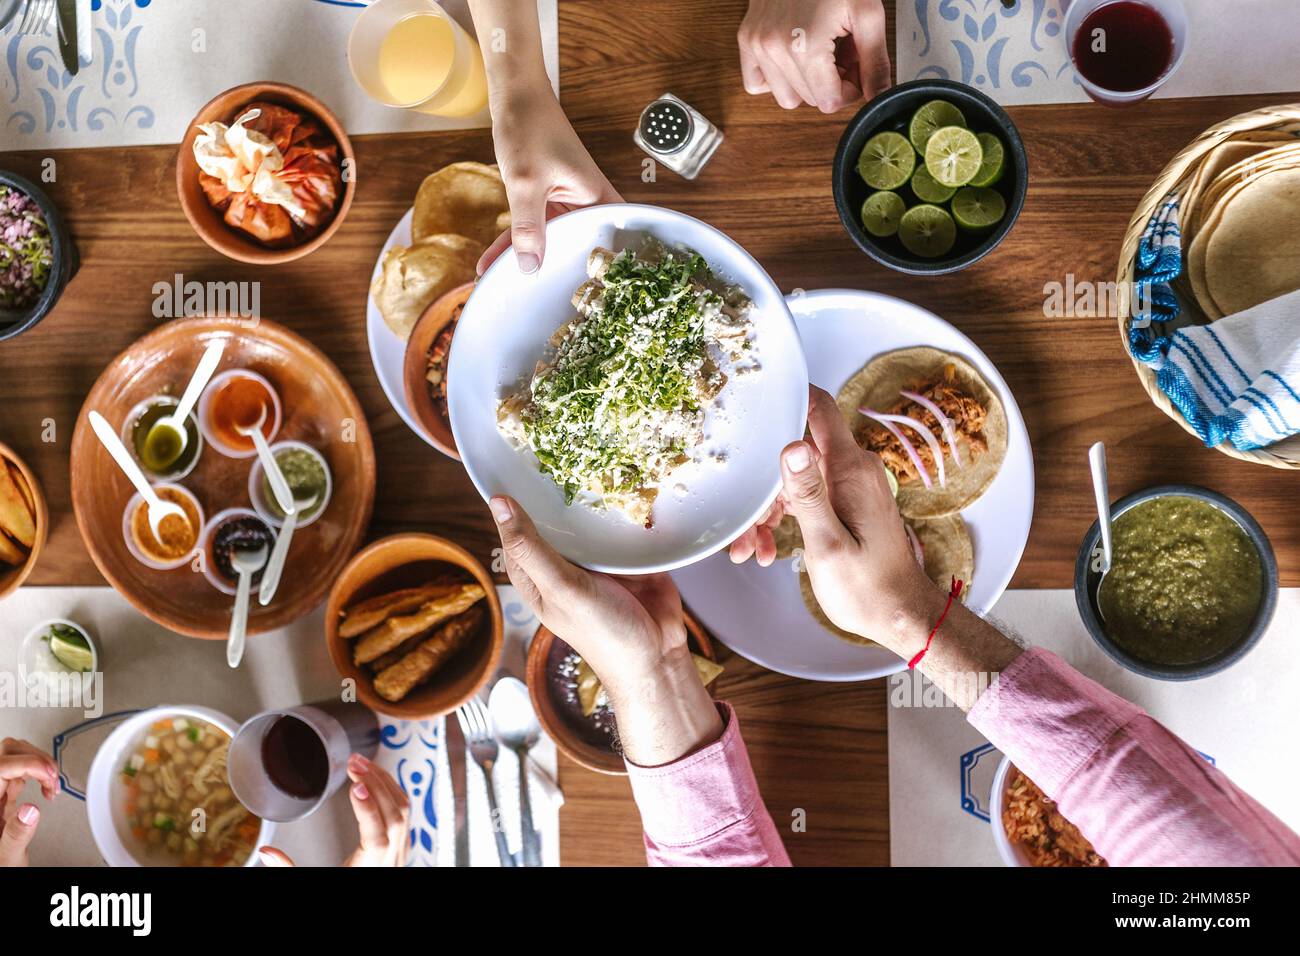 group of latin Friends eating Mexican Tacos and traditional food, snacks and peoples hands over table, top view. Mexican cuisine Latin America Stock Photo